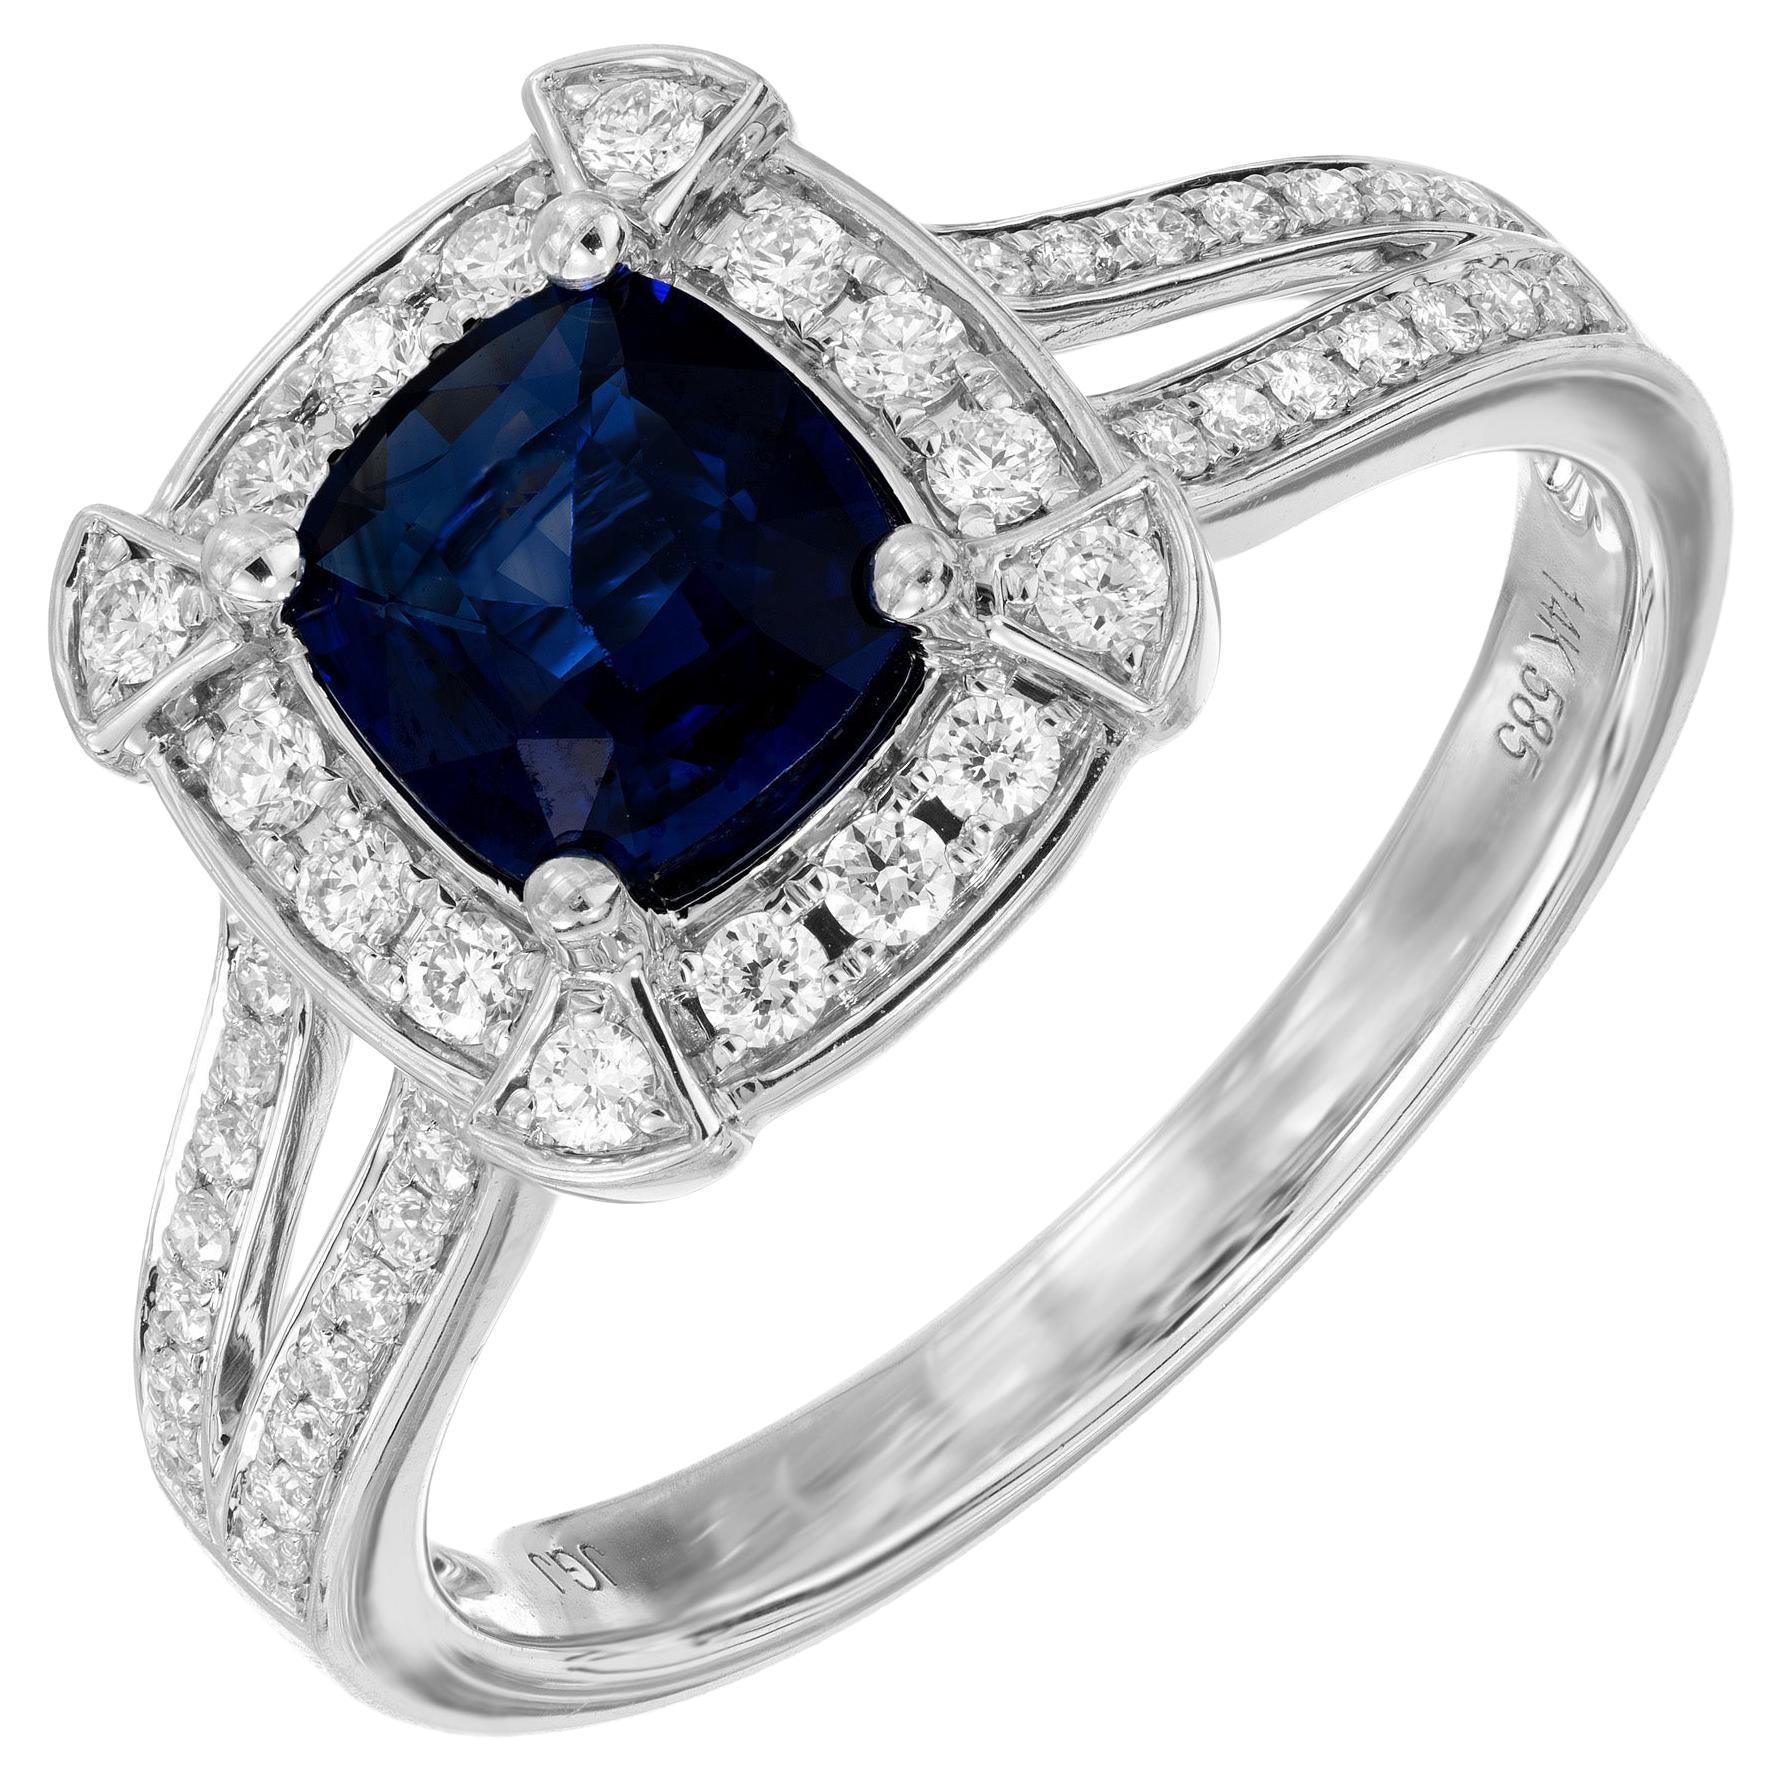 Peter Suchy GIA Certified 1.01 Carat Blue Sapphire Diamond Gold Engagement Ring 